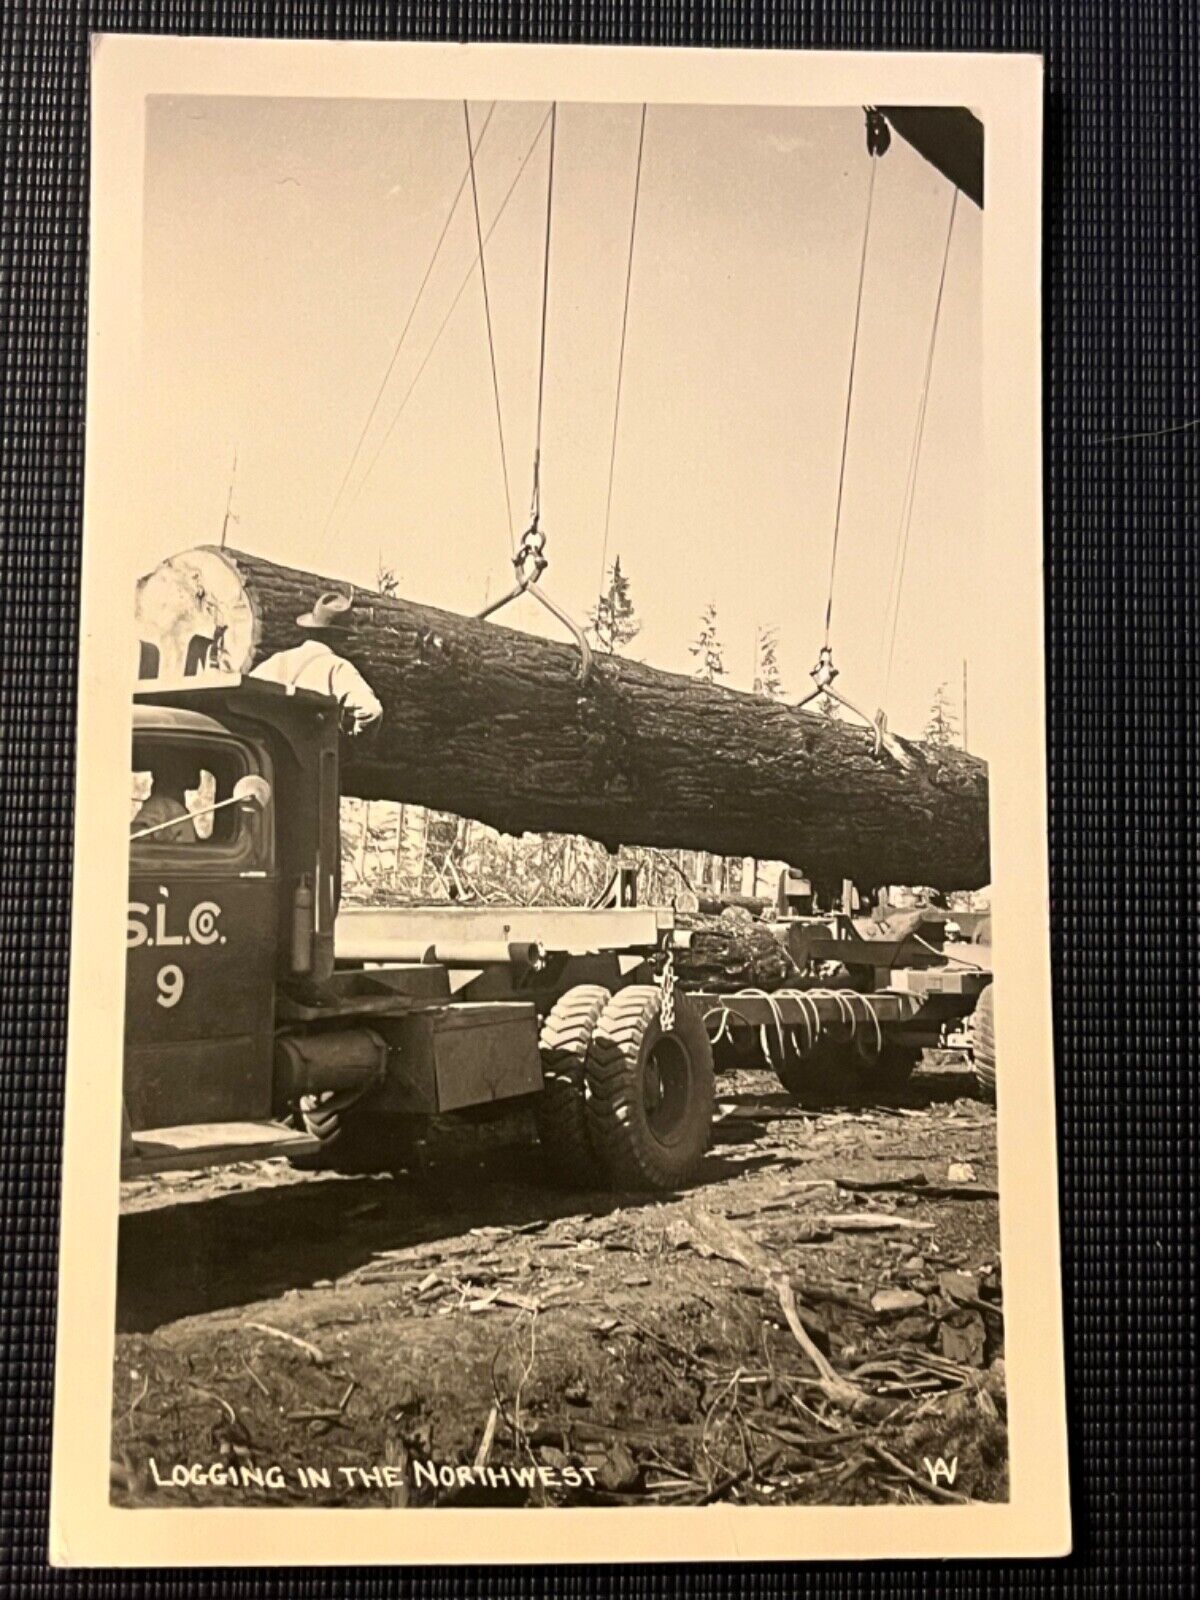 RPPC LOGGING IN THE NORTHWEST CIRCA 1945 PACIFIC TIMBER